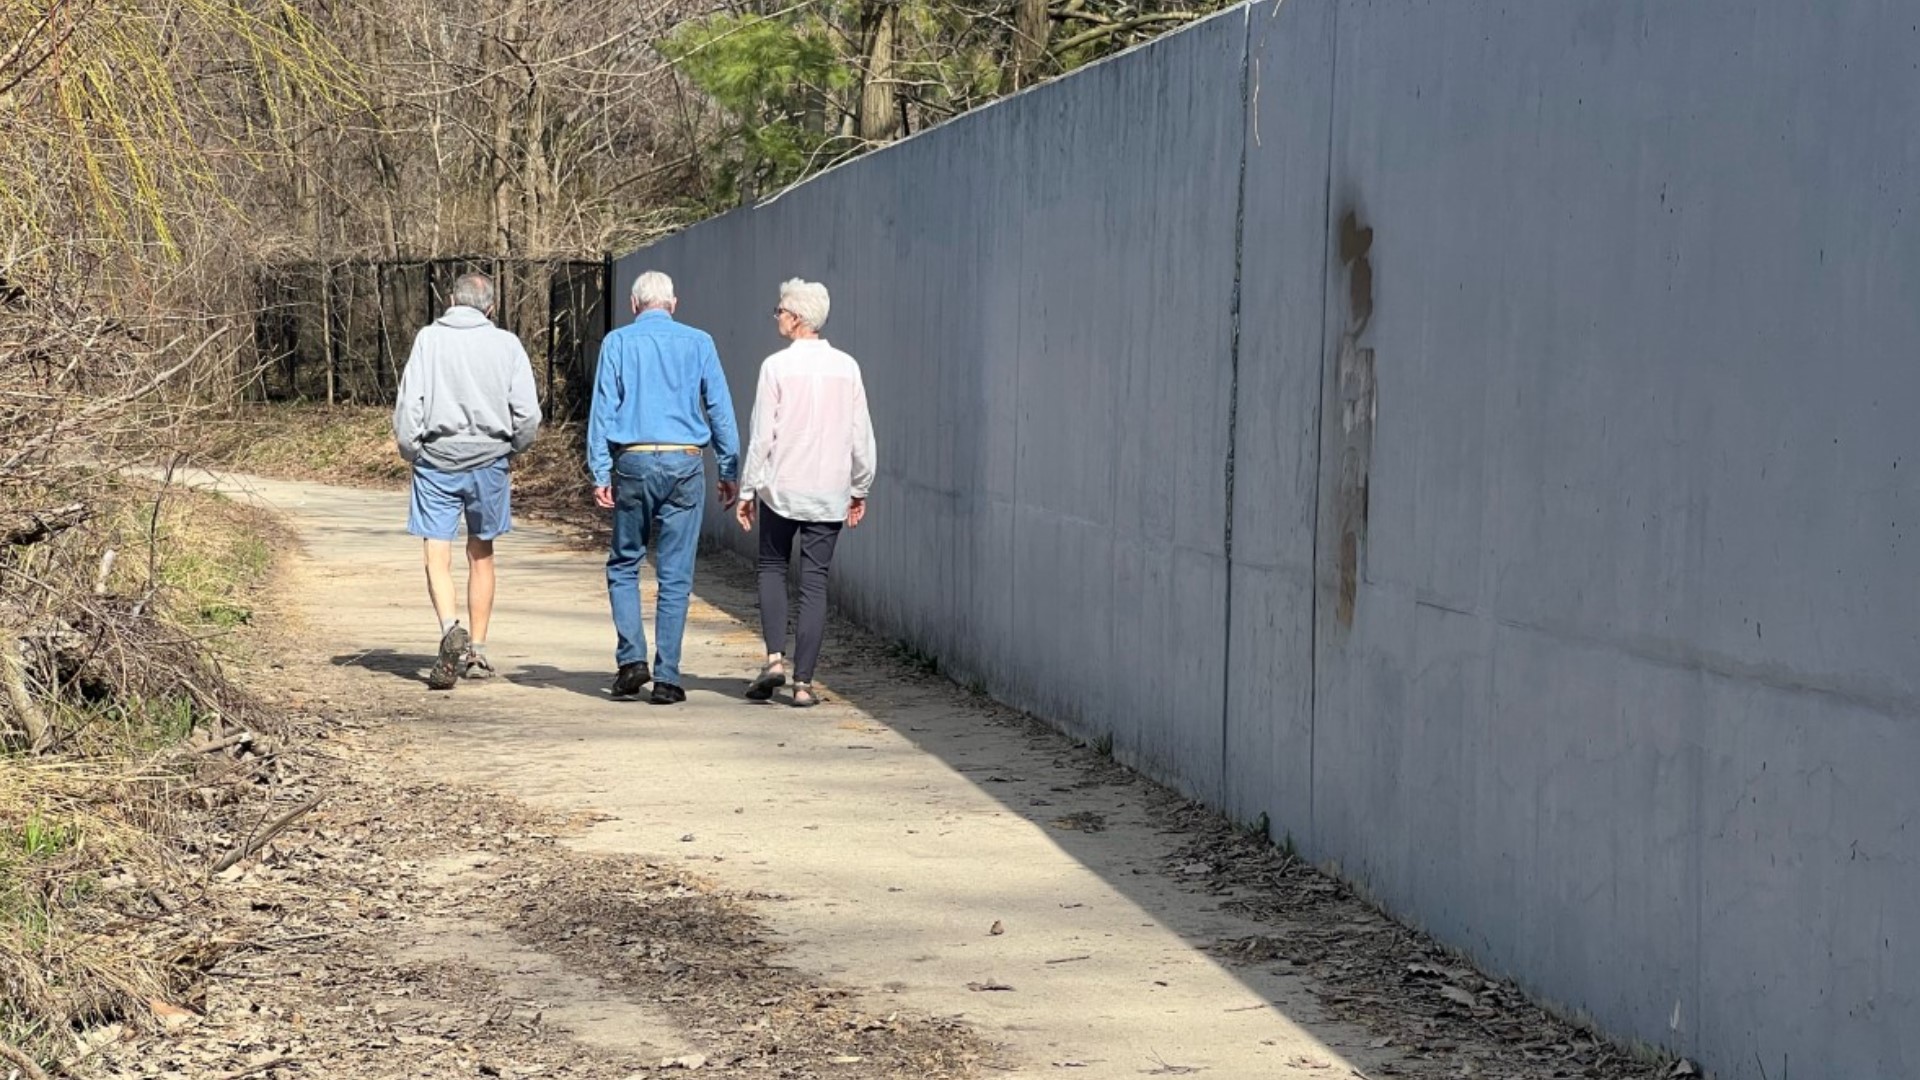 The group hopes to not only beautify the trail with the mural but to also support the ecological health of Plaster Creek.